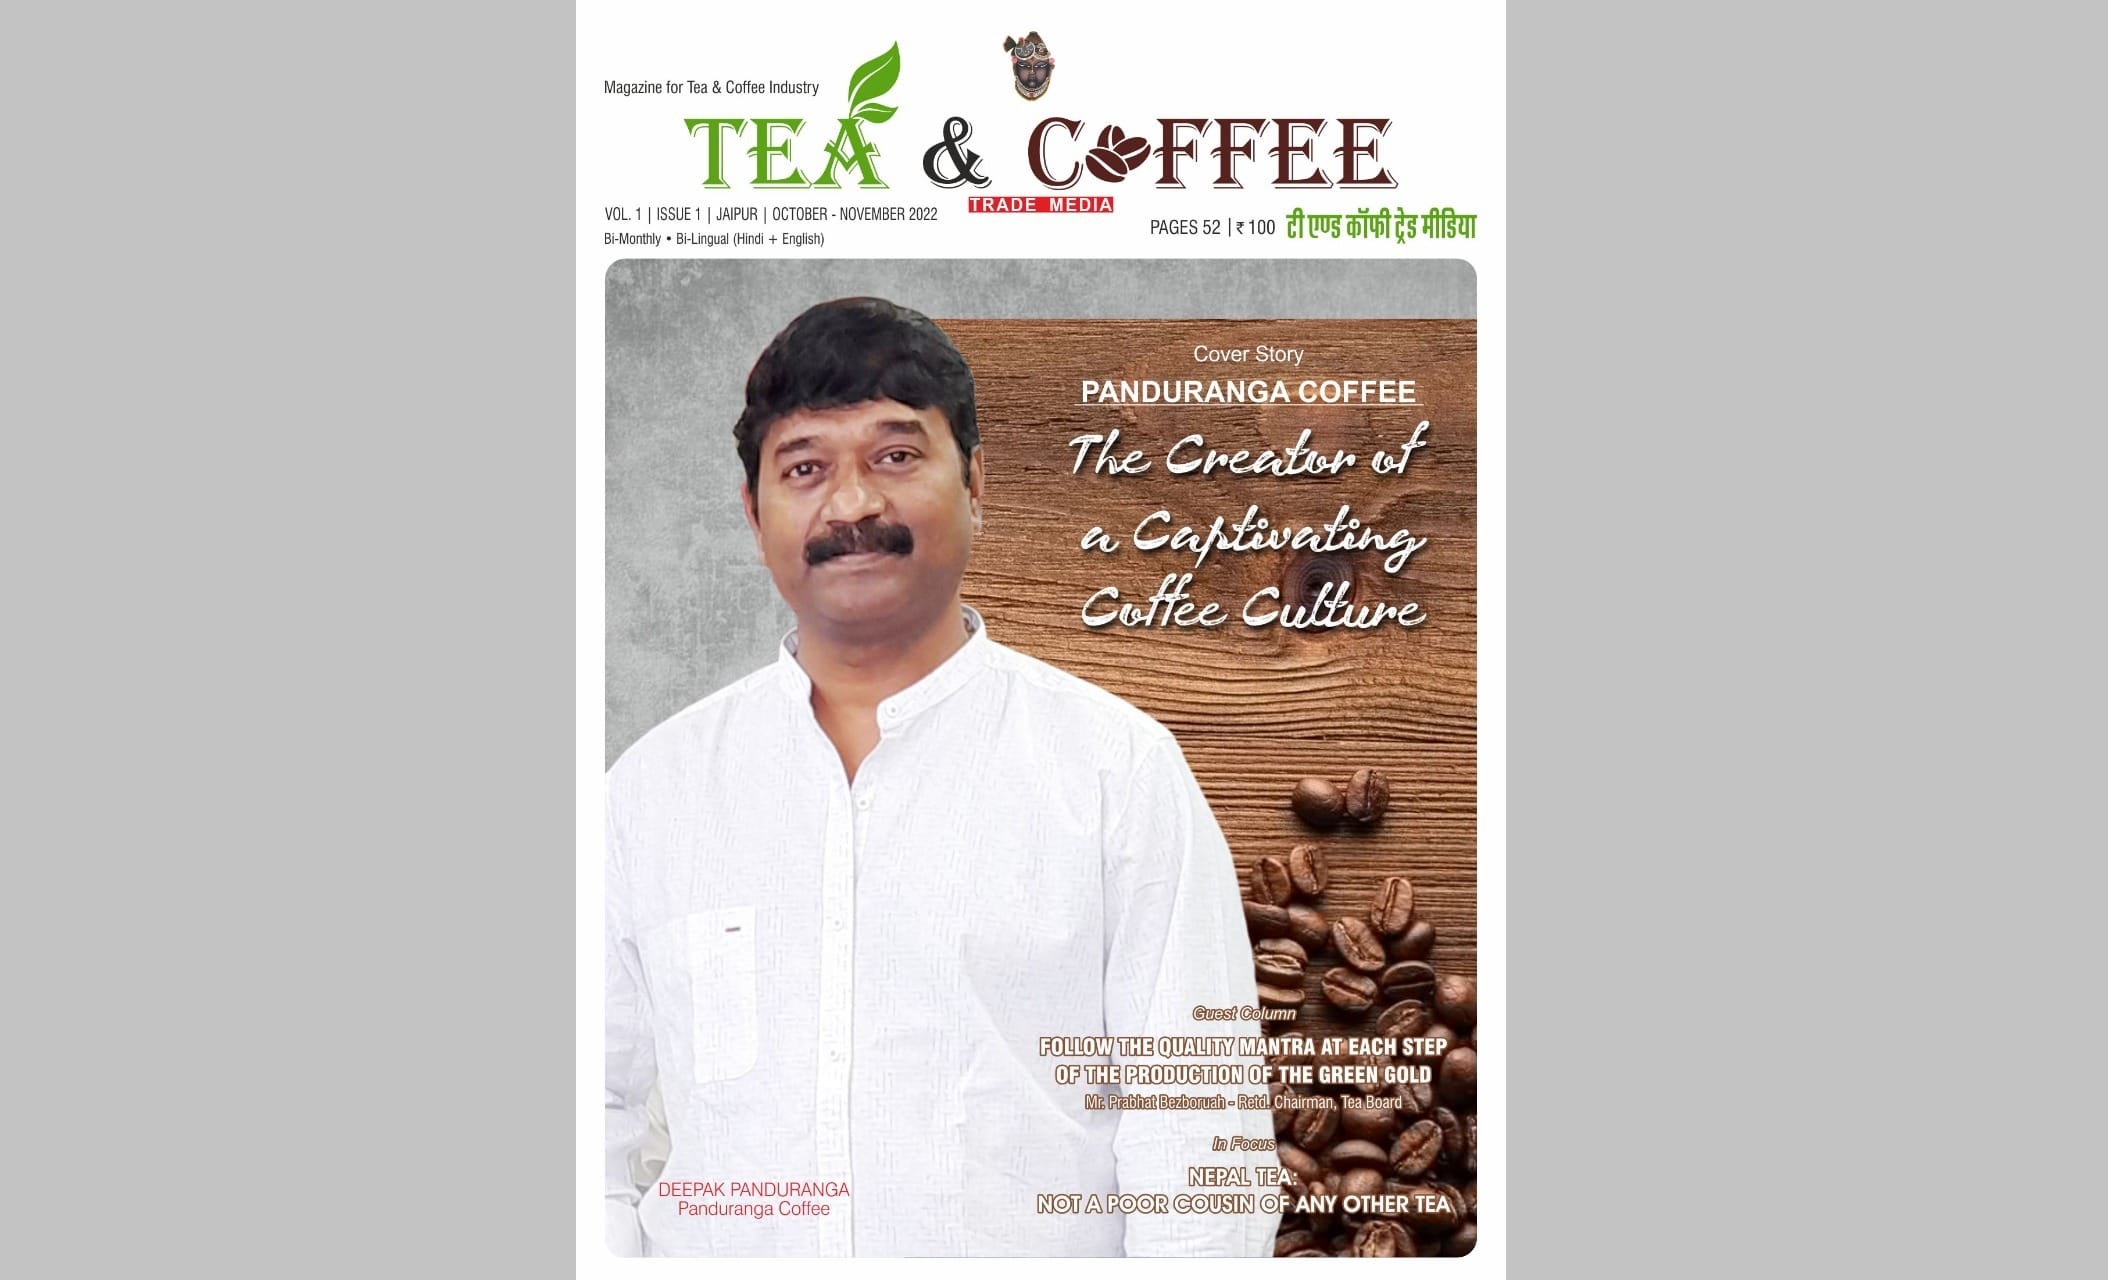 Tea & Coffee Trade Media releases its First Issue